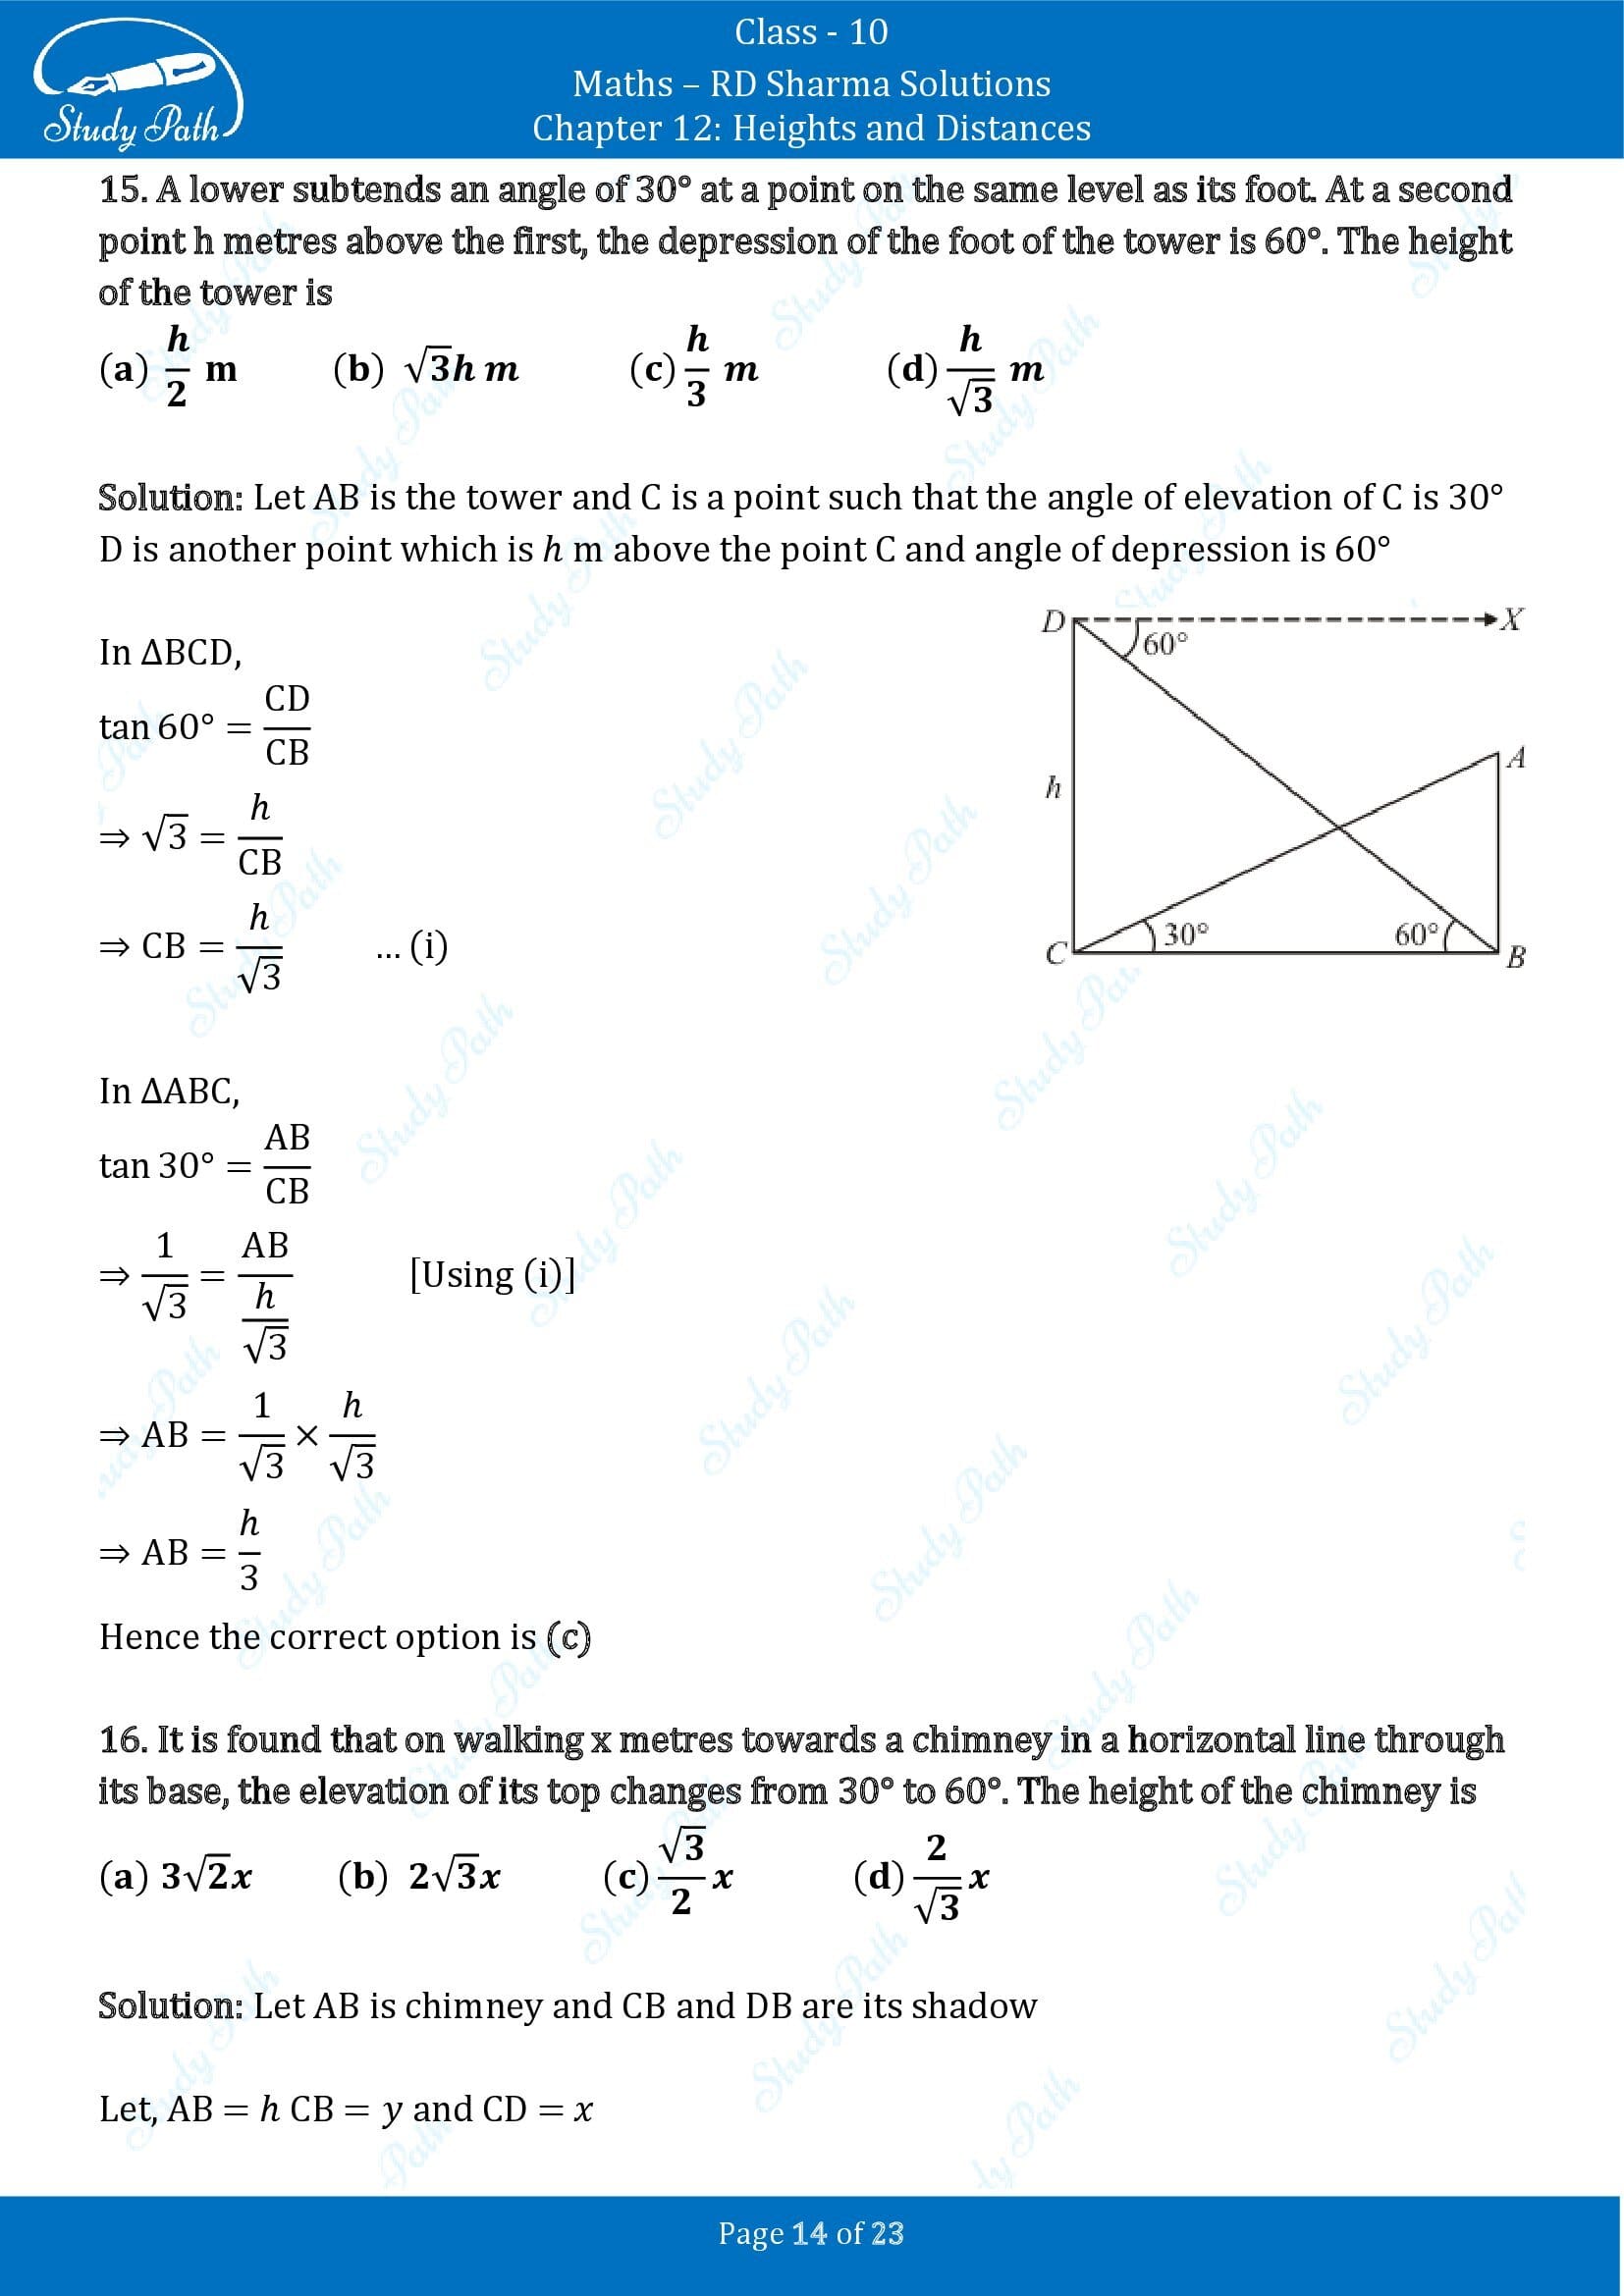 RD Sharma Solutions Class 10 Chapter 12 Heights and Distances Multiple Choice Question MCQs 00014